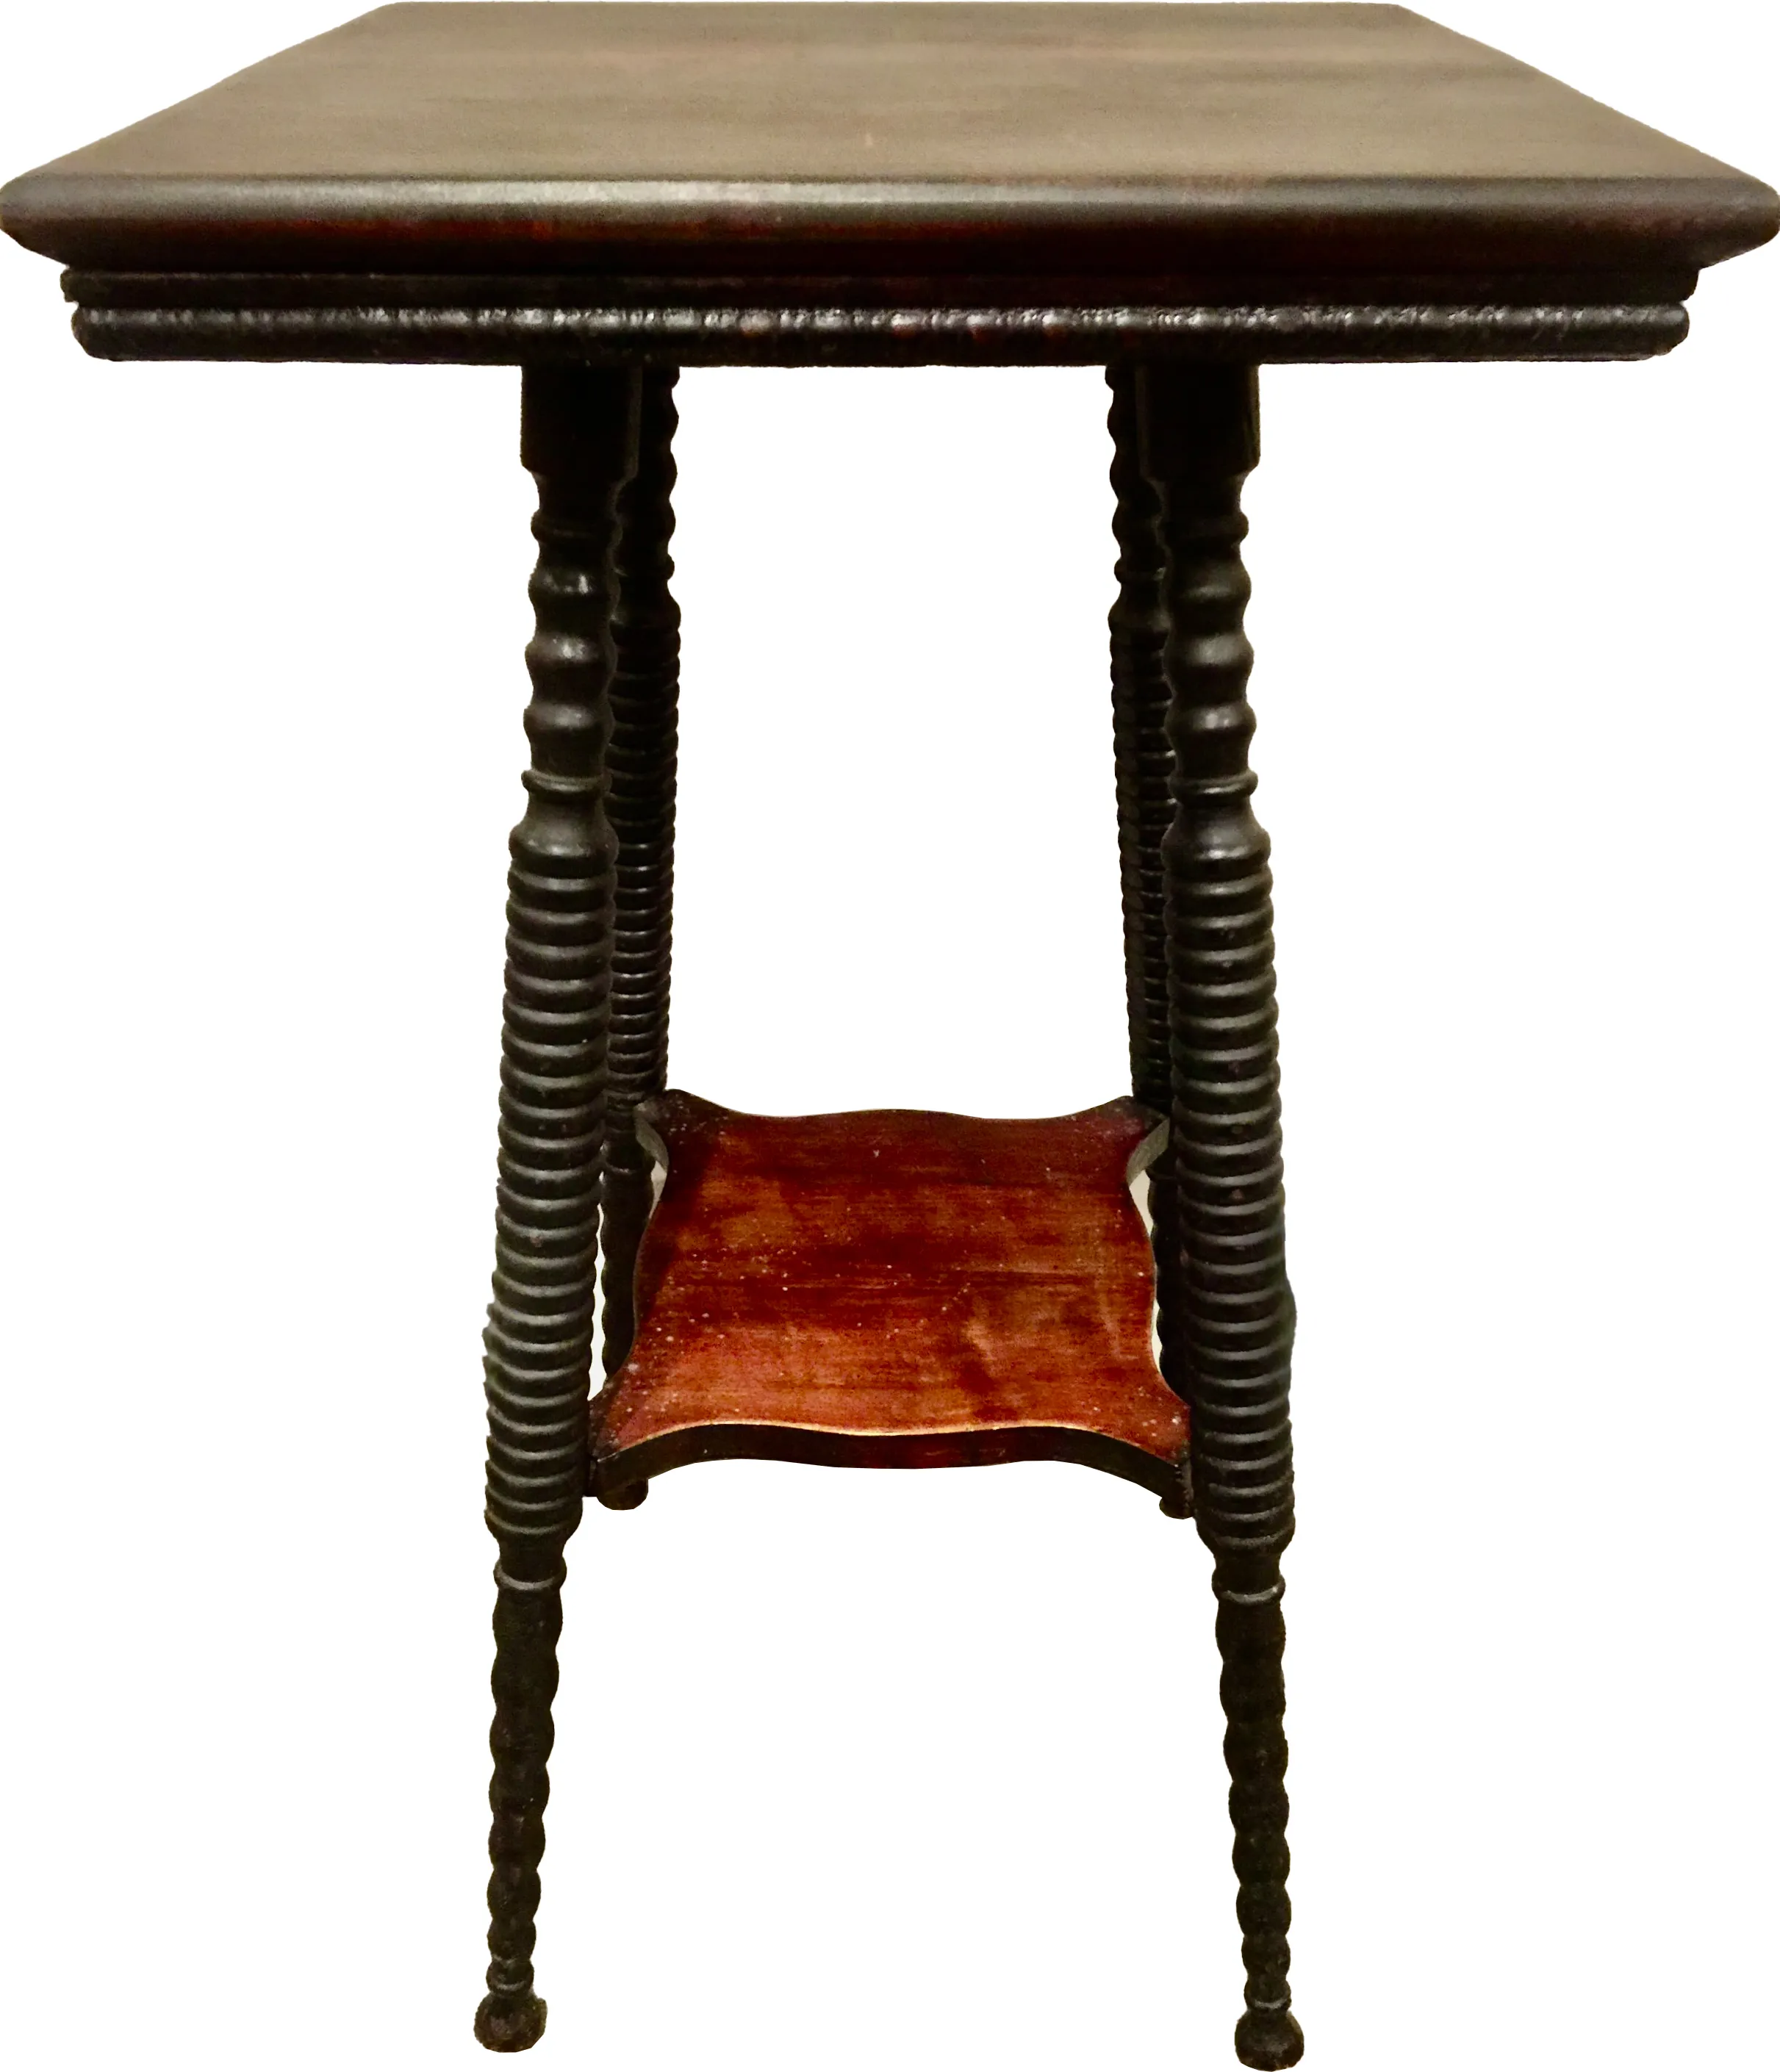 1900s Arts & Crafts Spindle-Legged Table - The Emporium Ltd. - Brown